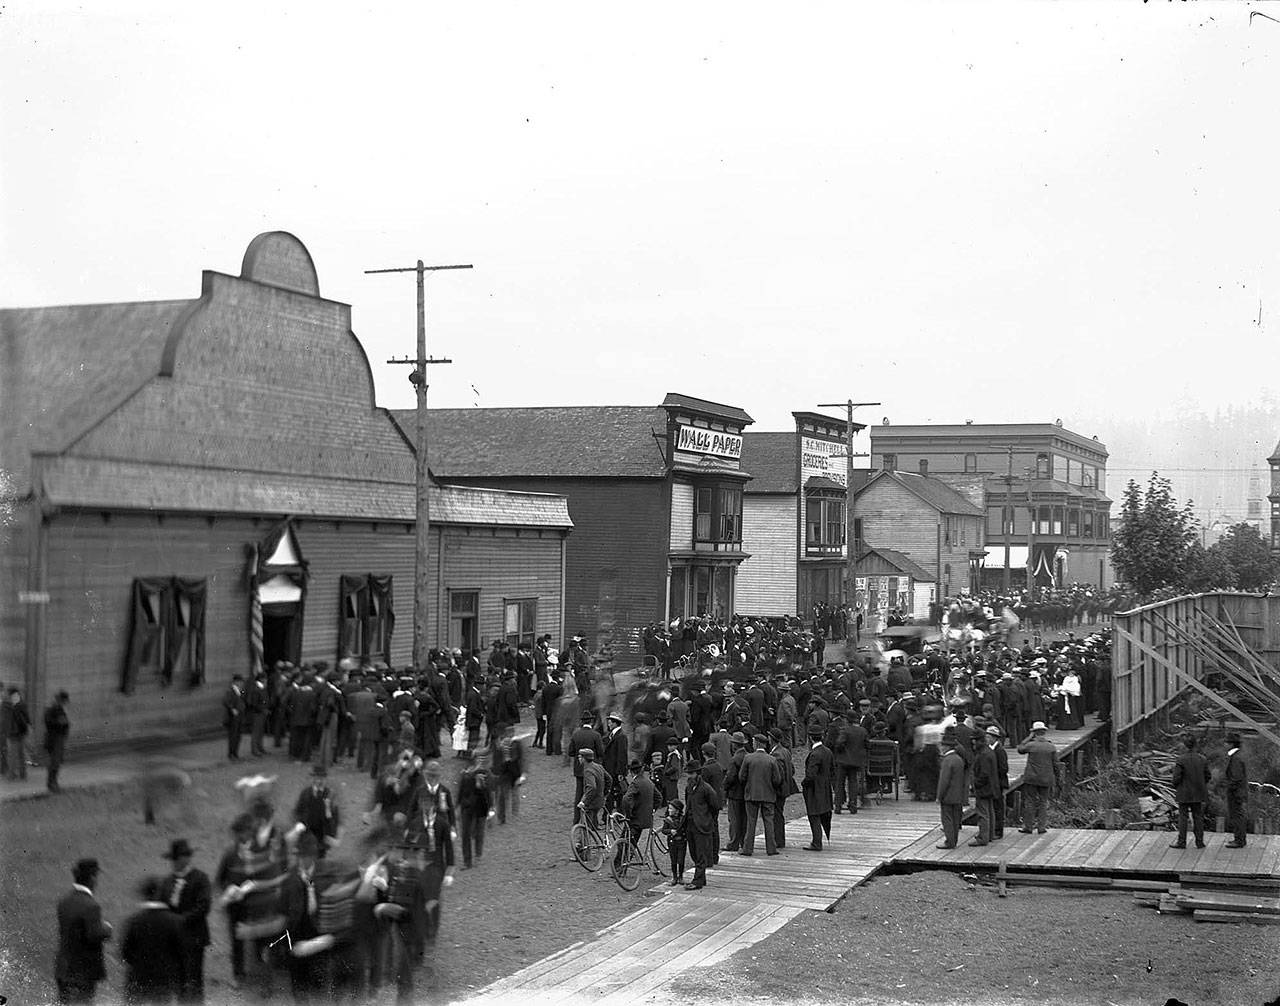 H Street on Sept. 19, 1901. The image is from the Jones Photo Collection.